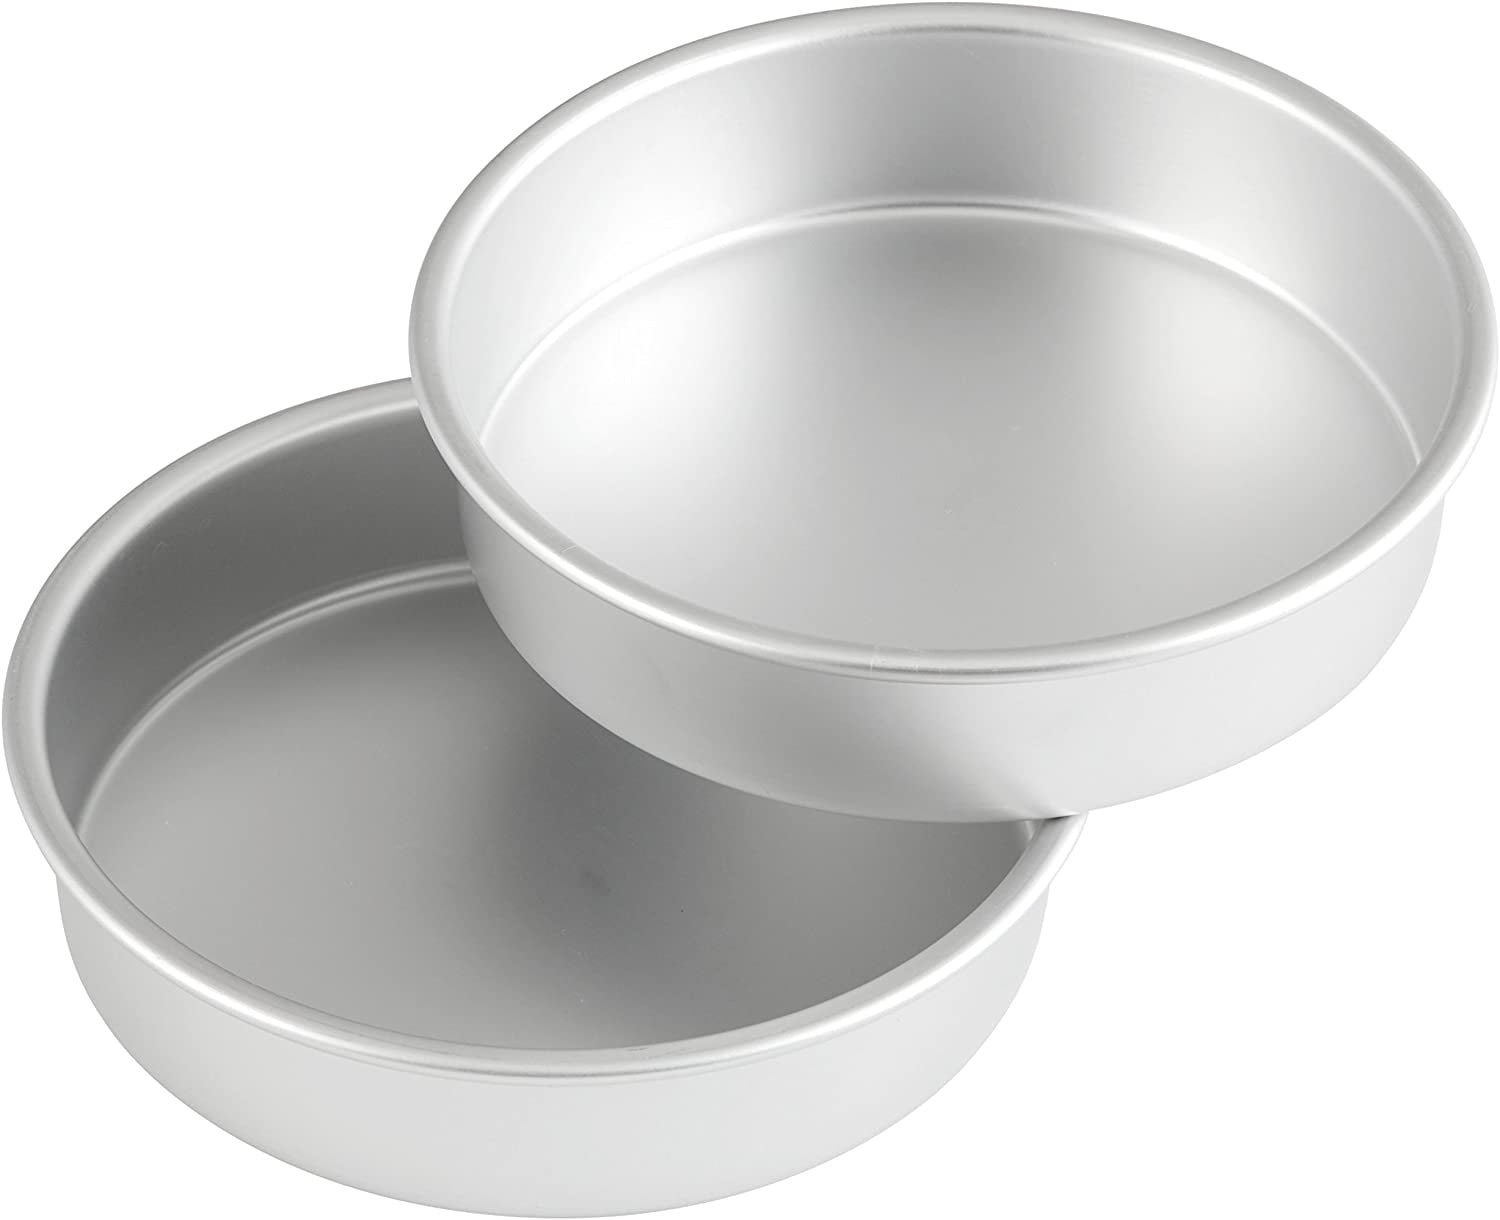  Crown 5 inch Cheesecake Pan, 3 Deep, Cake Pan Removable  Bottom, Heavy Duty, Pure Aluminum, Made in Canada Silver: Home & Kitchen